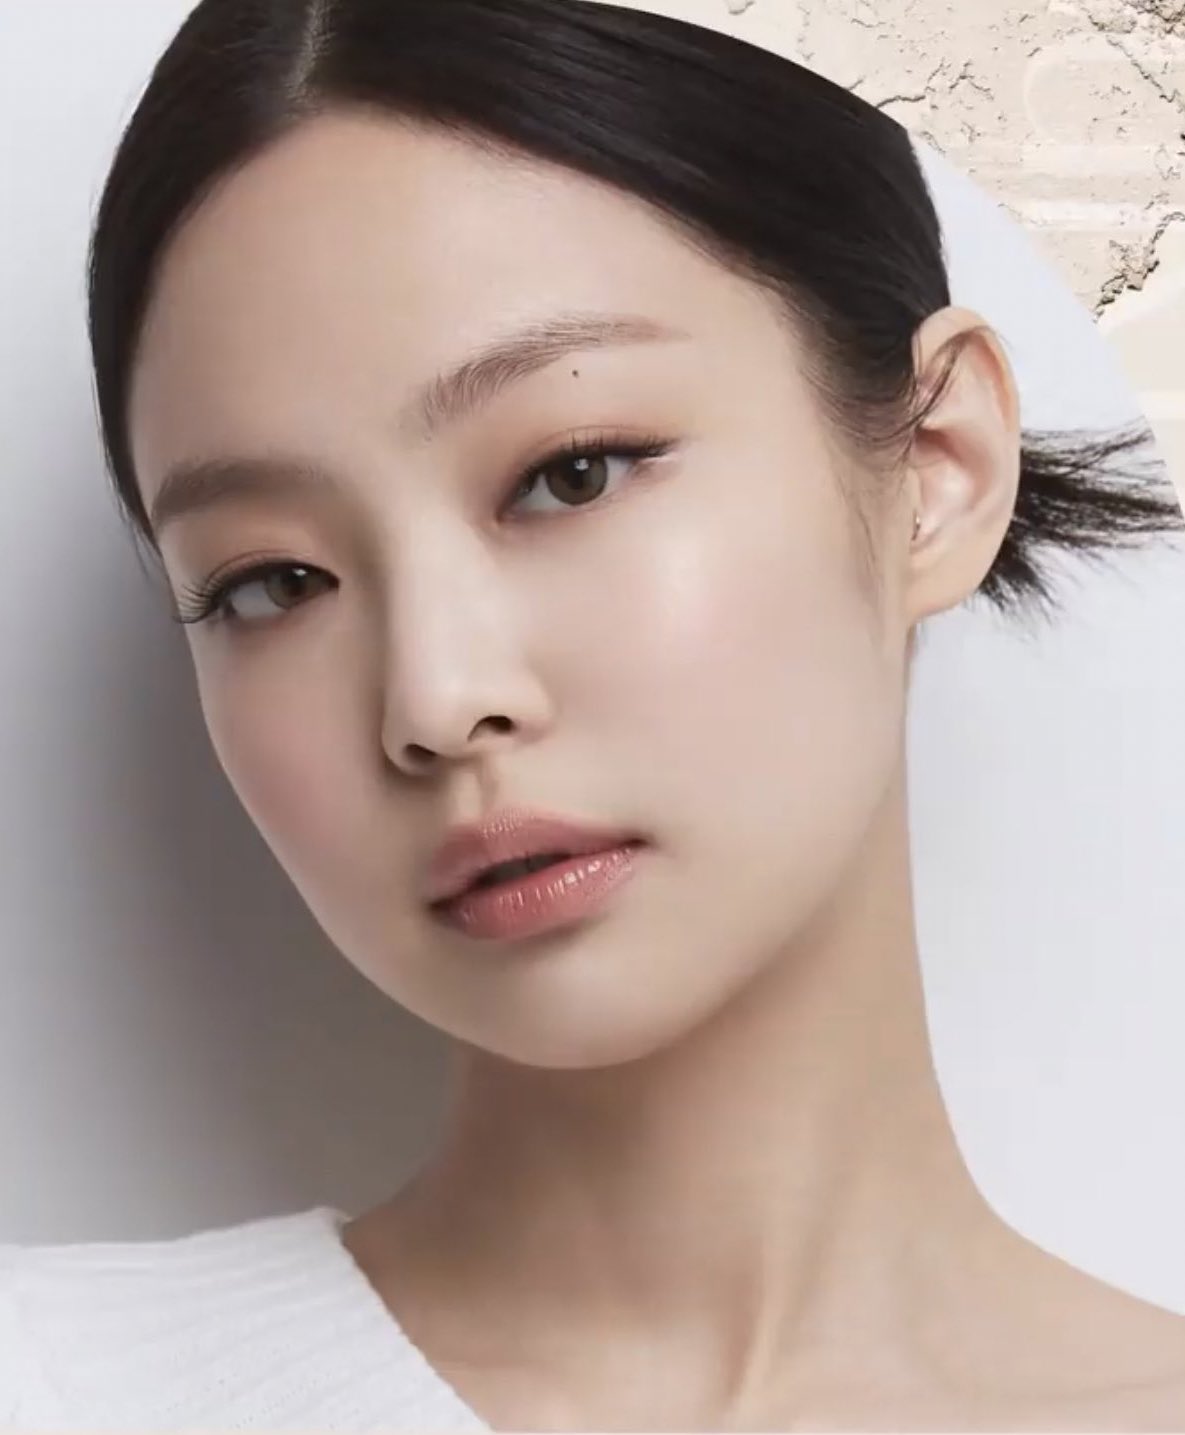 ِ on Twitter: "who has the prettiest eyes and face?It's jennie kim.  https://t.co/oZR5BlV7sq" / Twitter